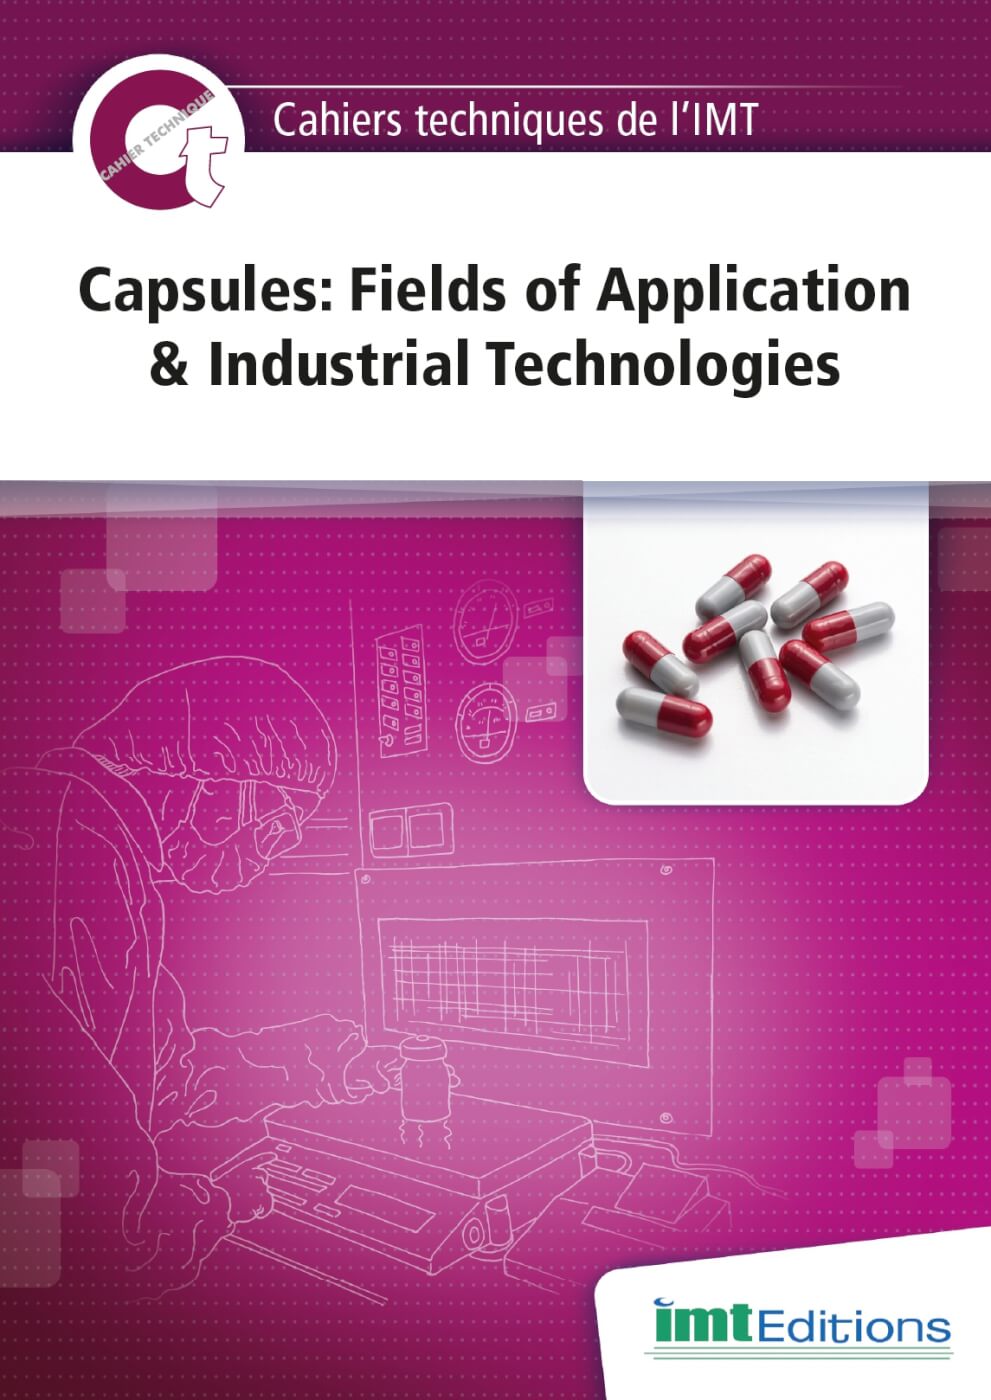 Capsules : Fields of Application & Industrial Technologies